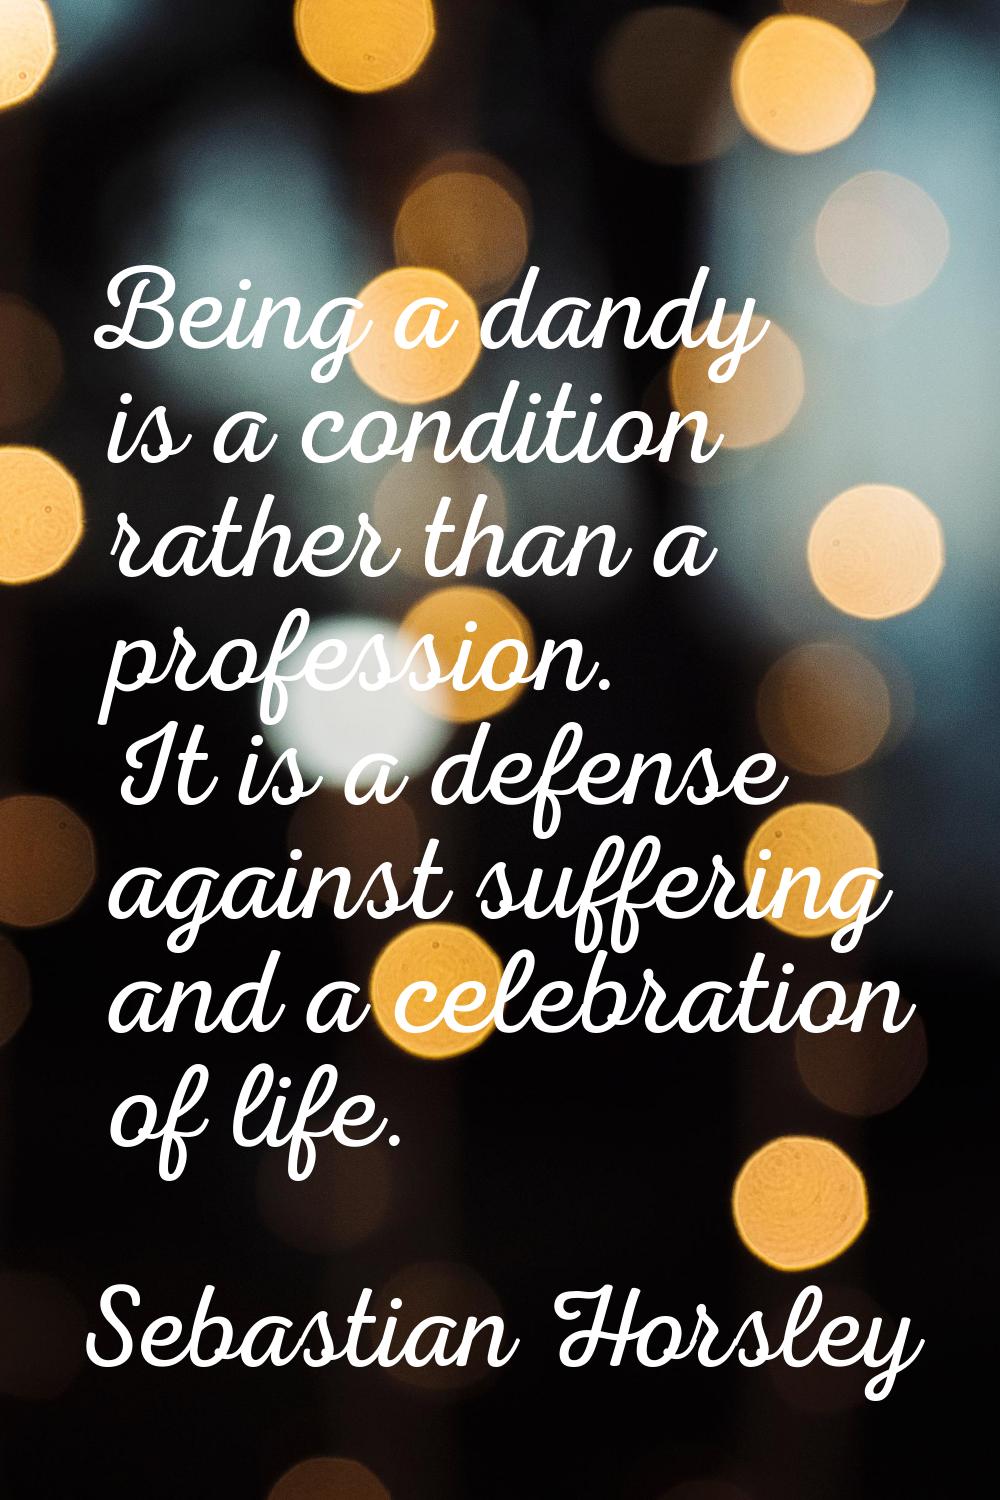 Being a dandy is a condition rather than a profession. It is a defense against suffering and a cele